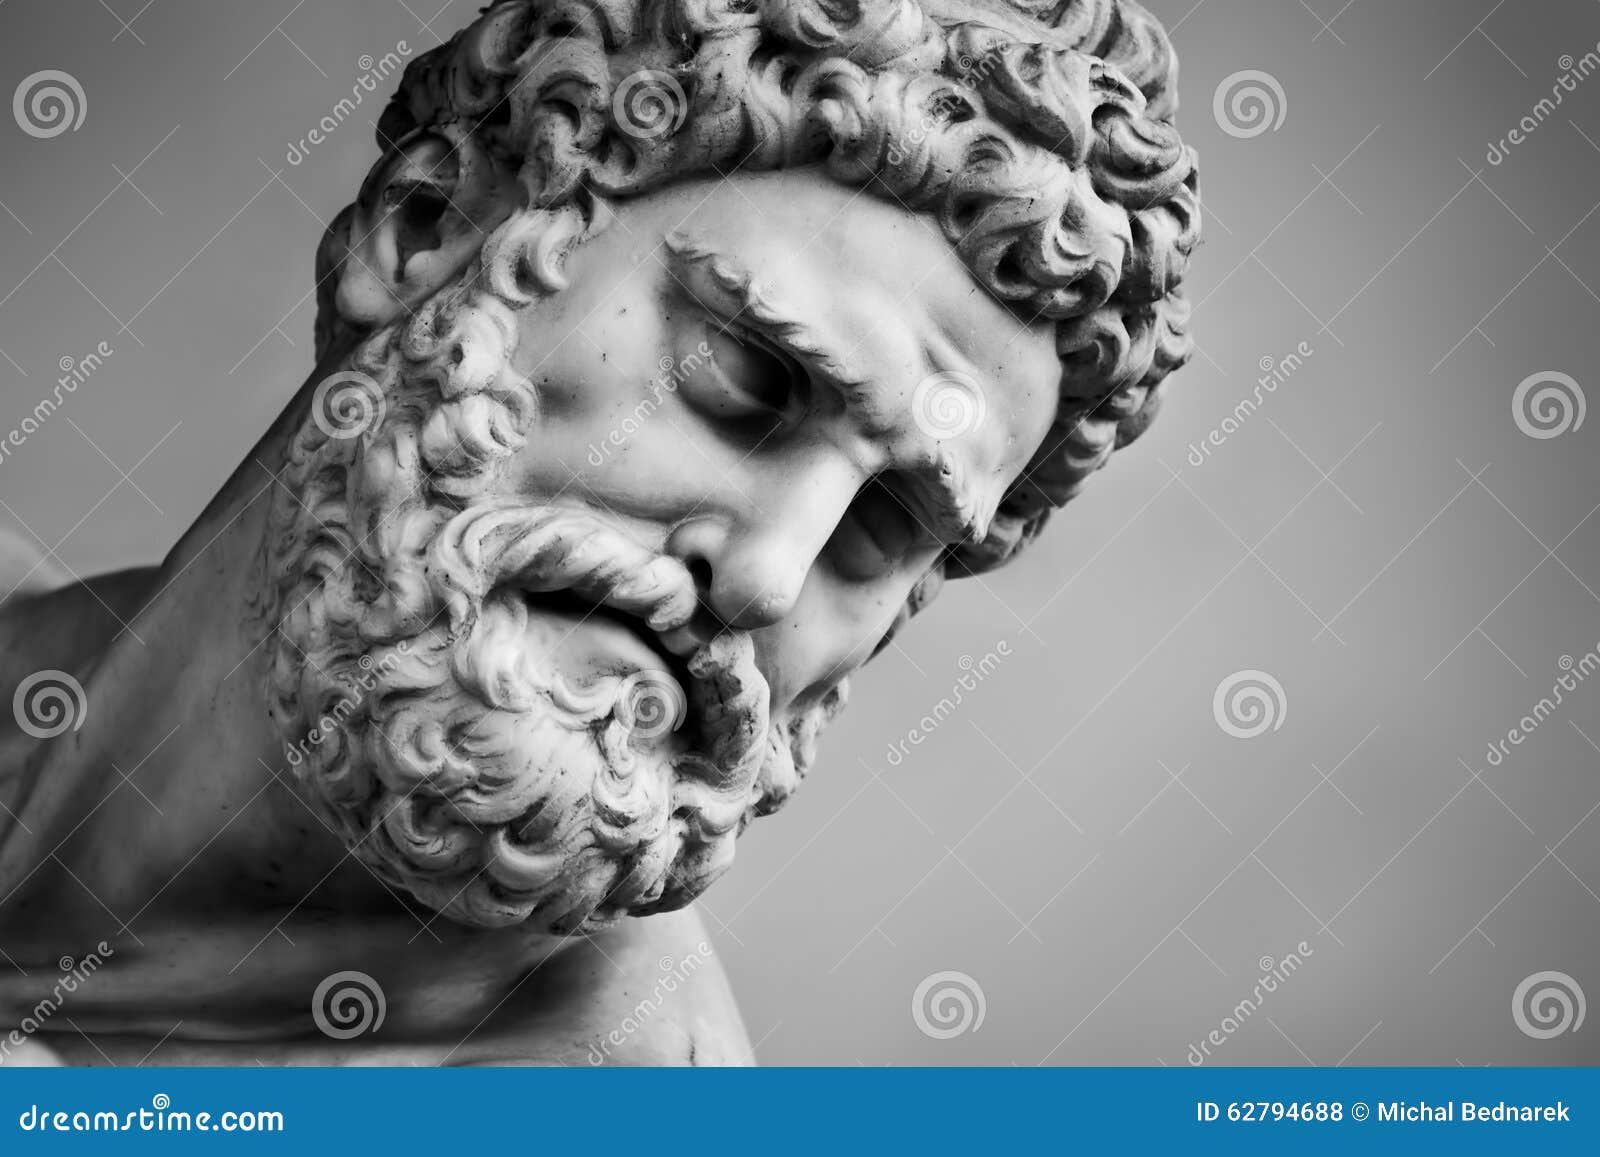 ancient sculpture of hercules and nessus. florence, italy. head close-up